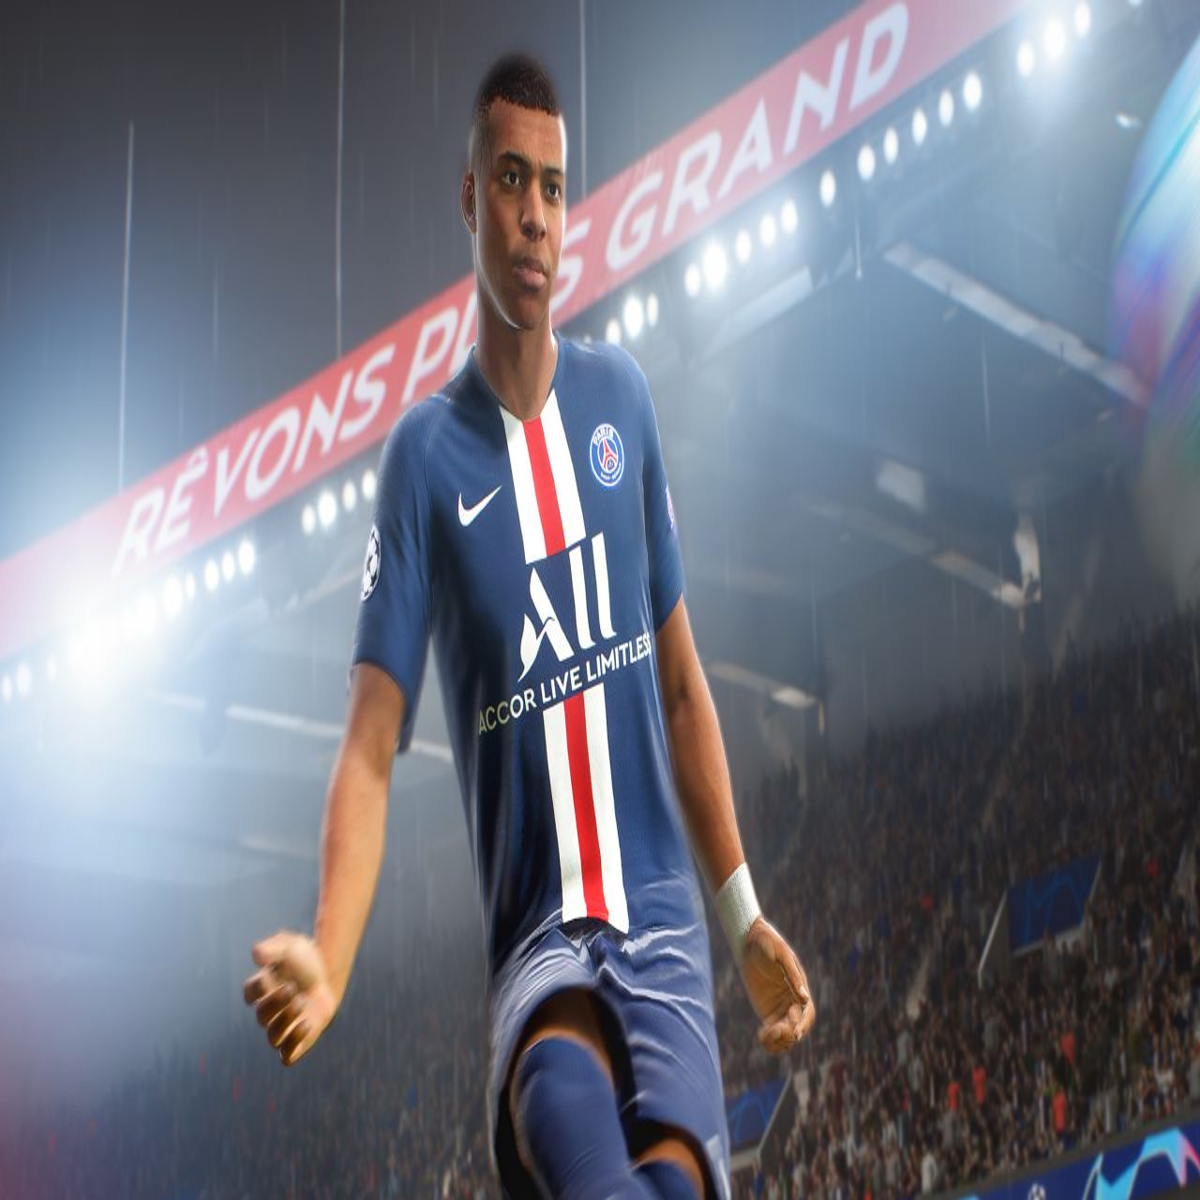 FIFA 21: Release Date, New Gameplay Improvements Modes Confirmed